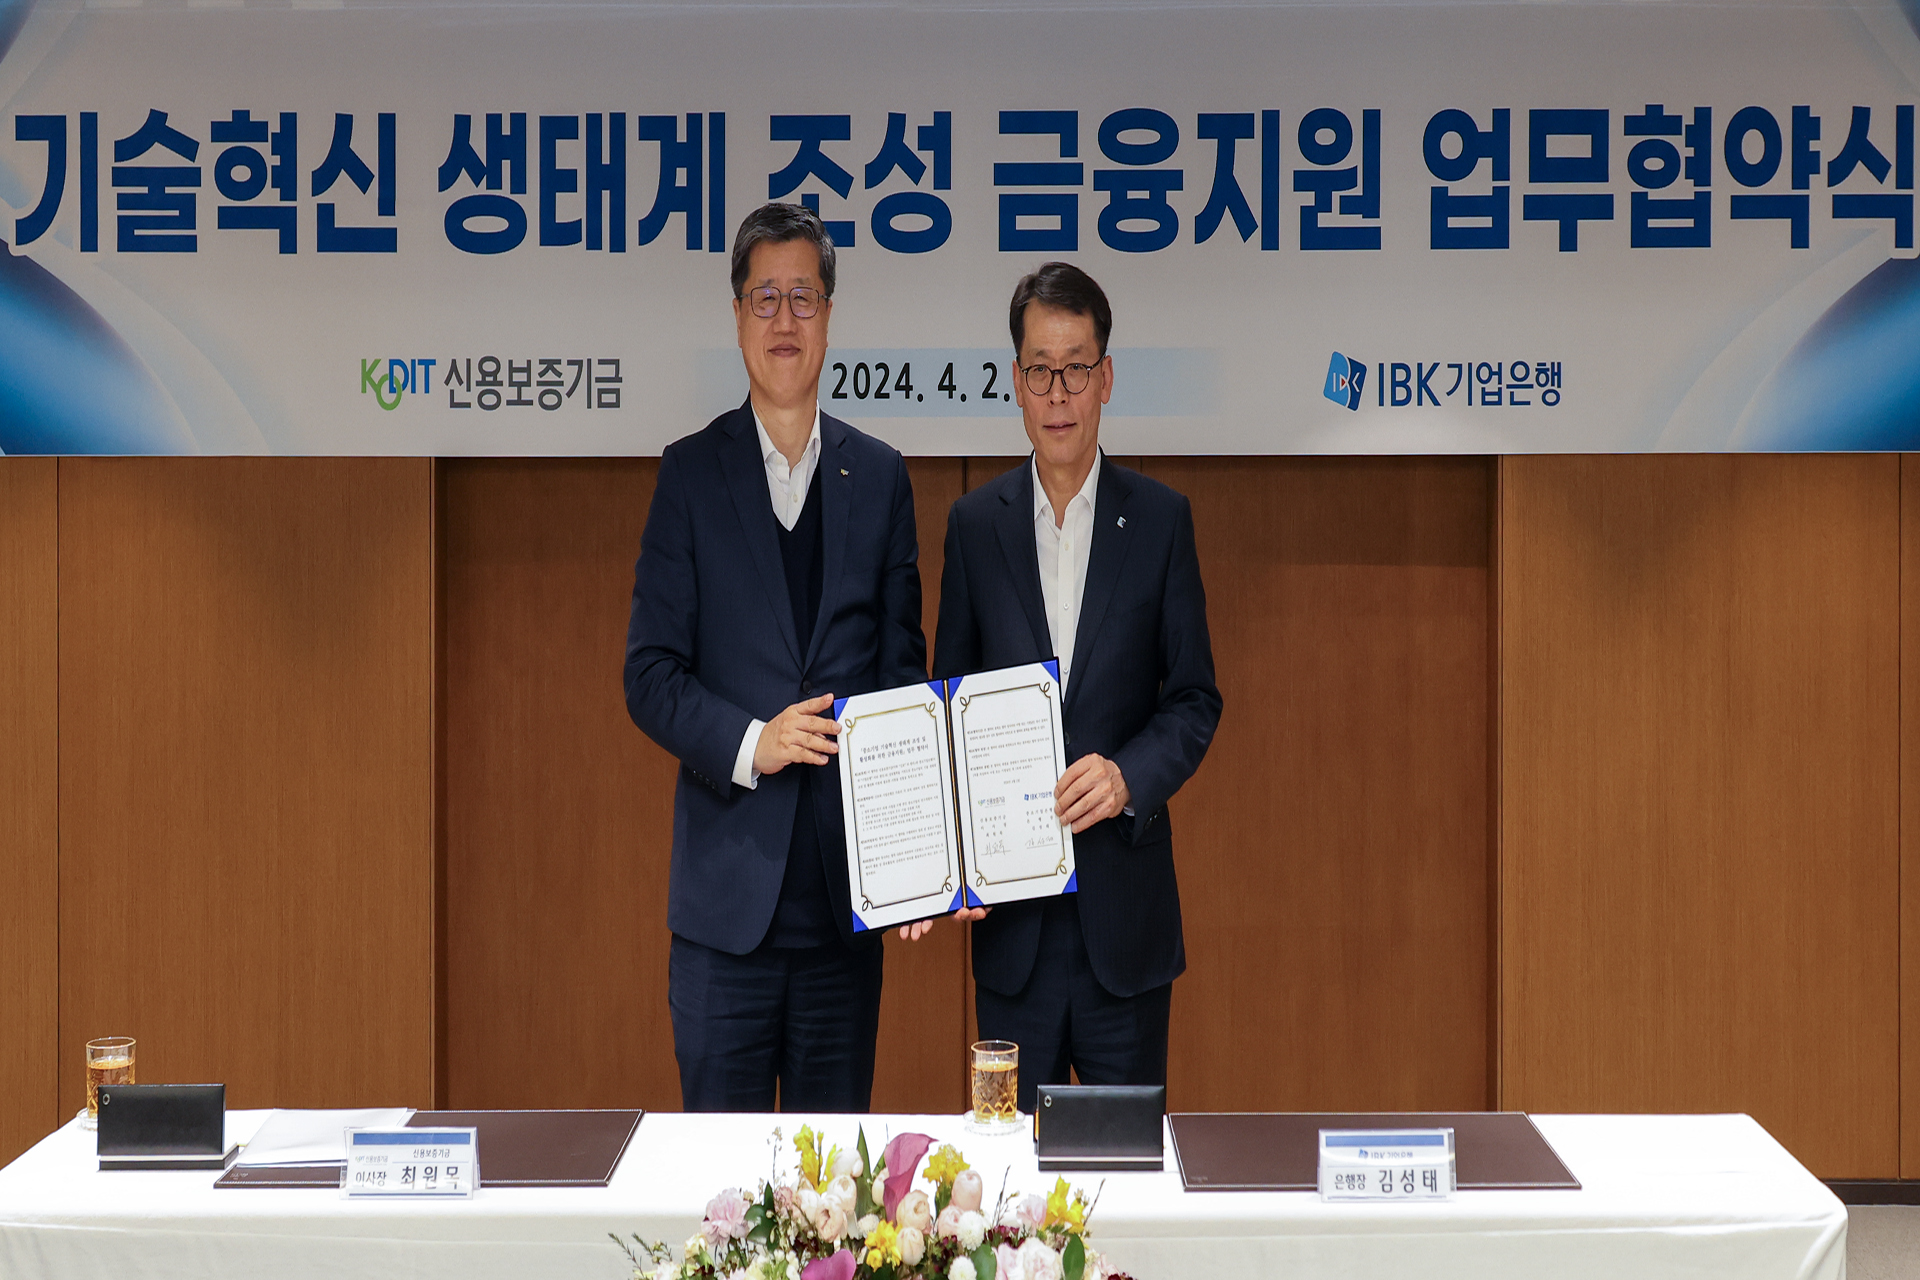 KODIT Signs an MOU on Creating Ecosystem for SMEs' Technological Innovations with IBK (April 4, 2024)